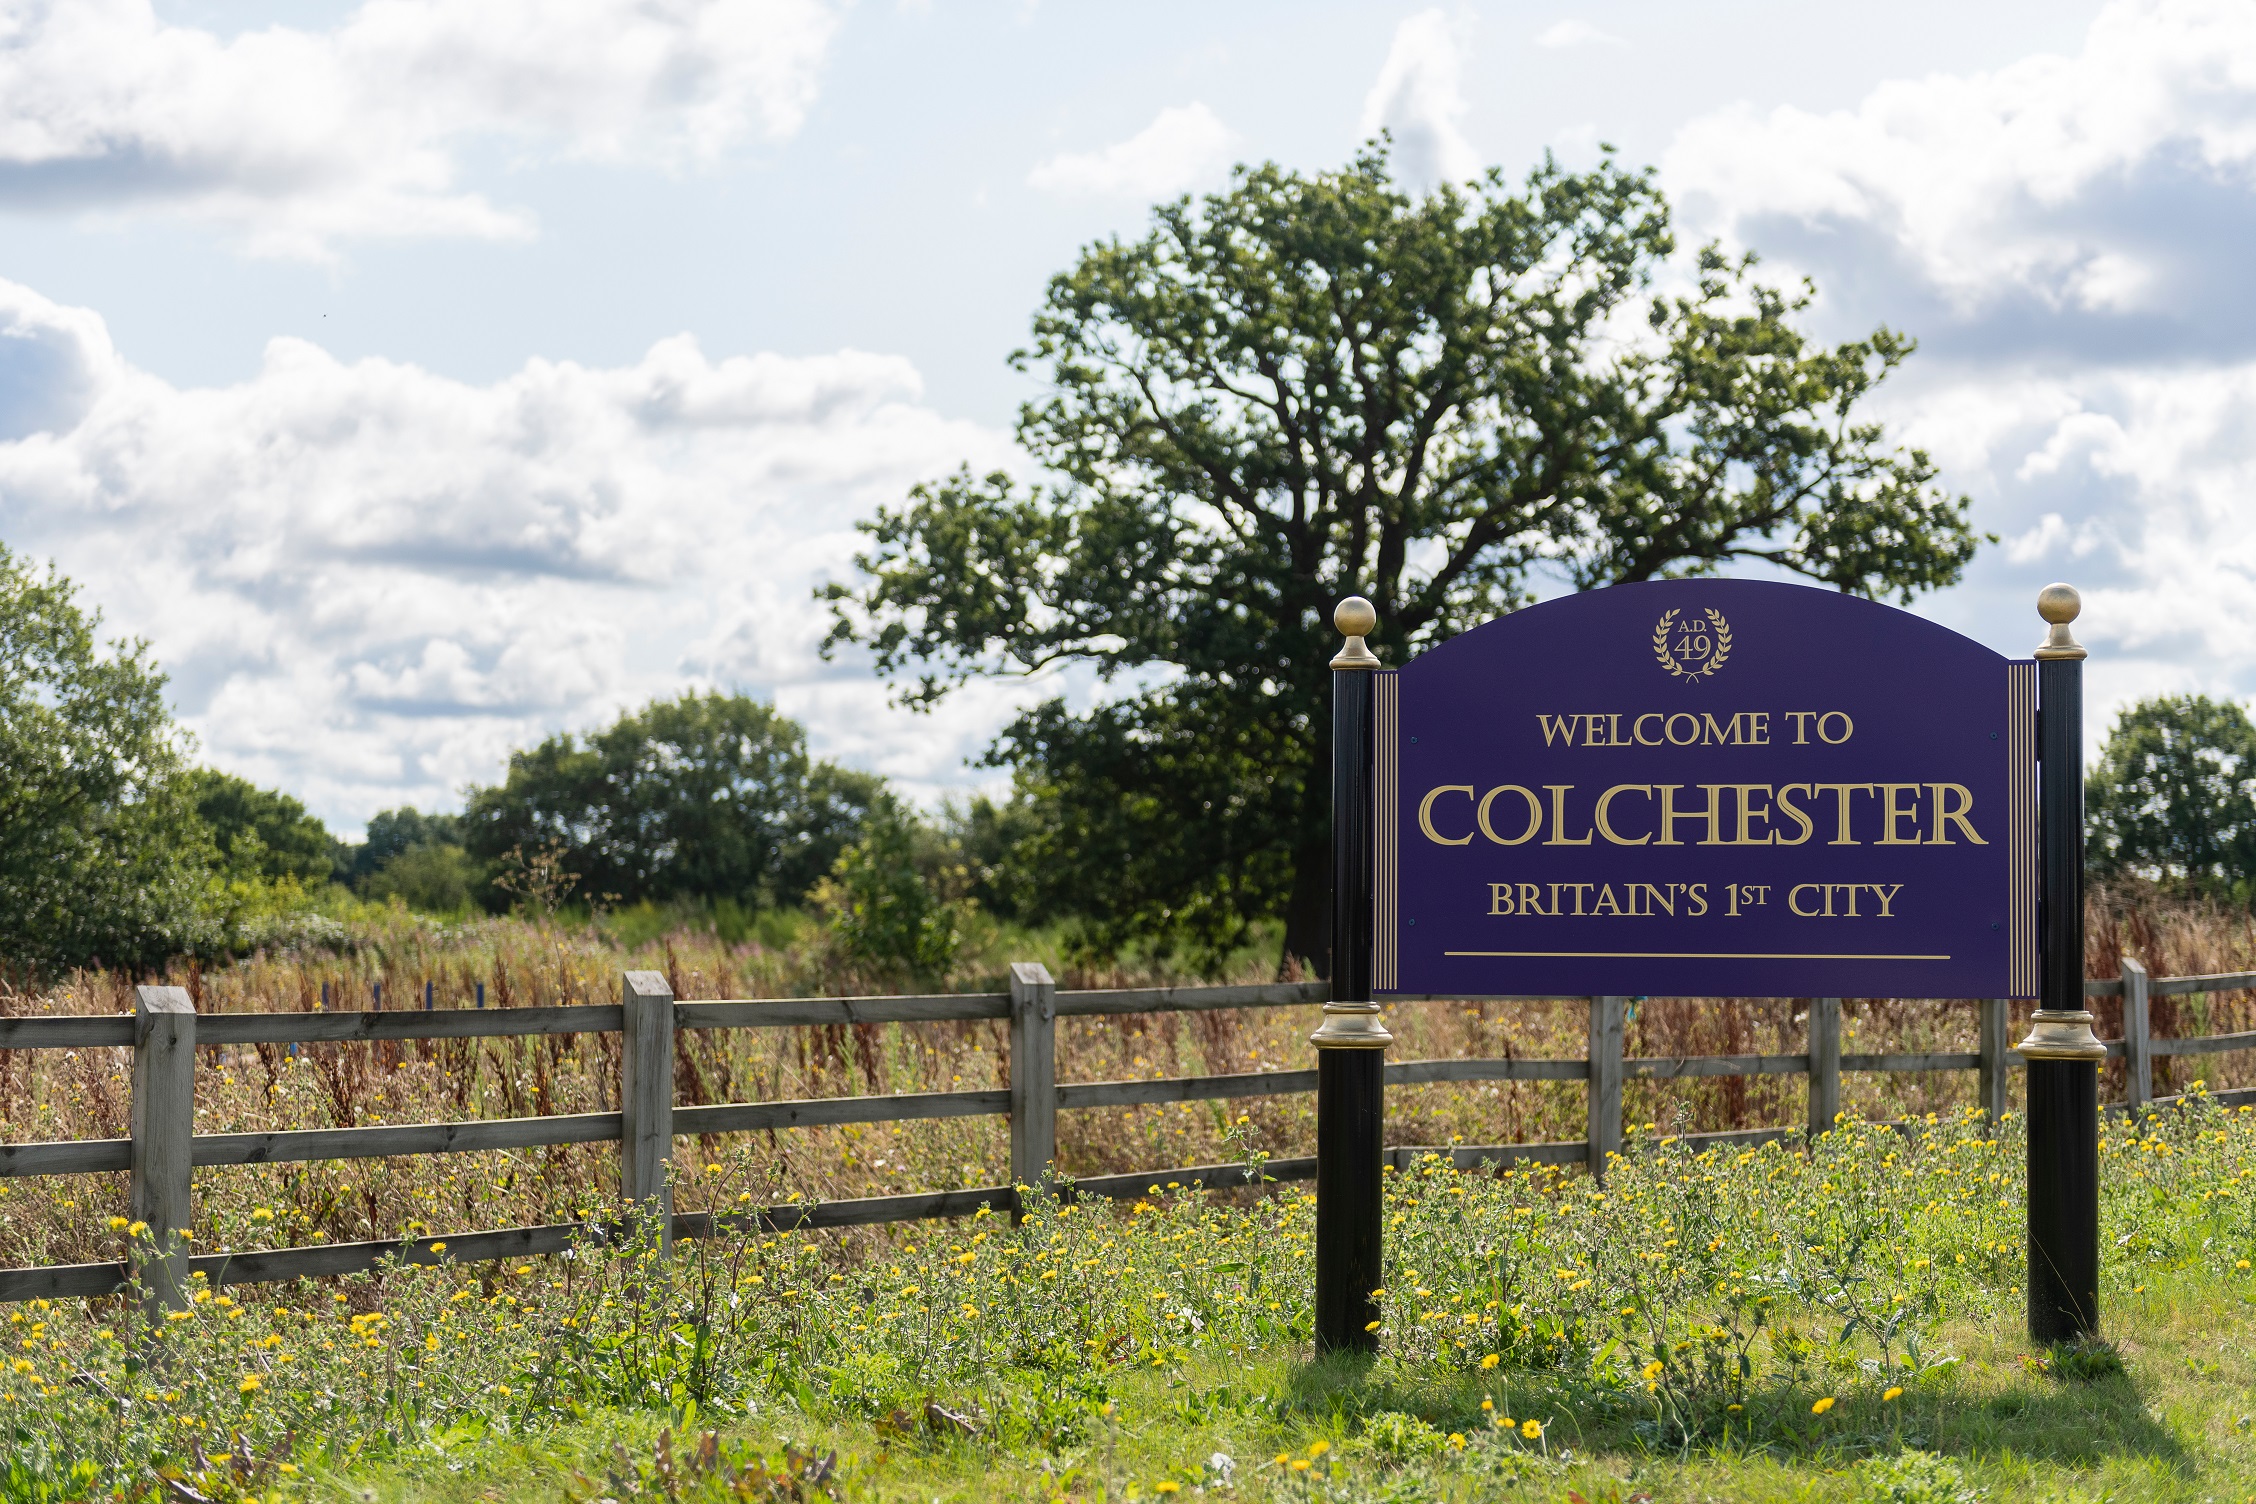 Colchester is Britain’s first recorded settlement and its first capital